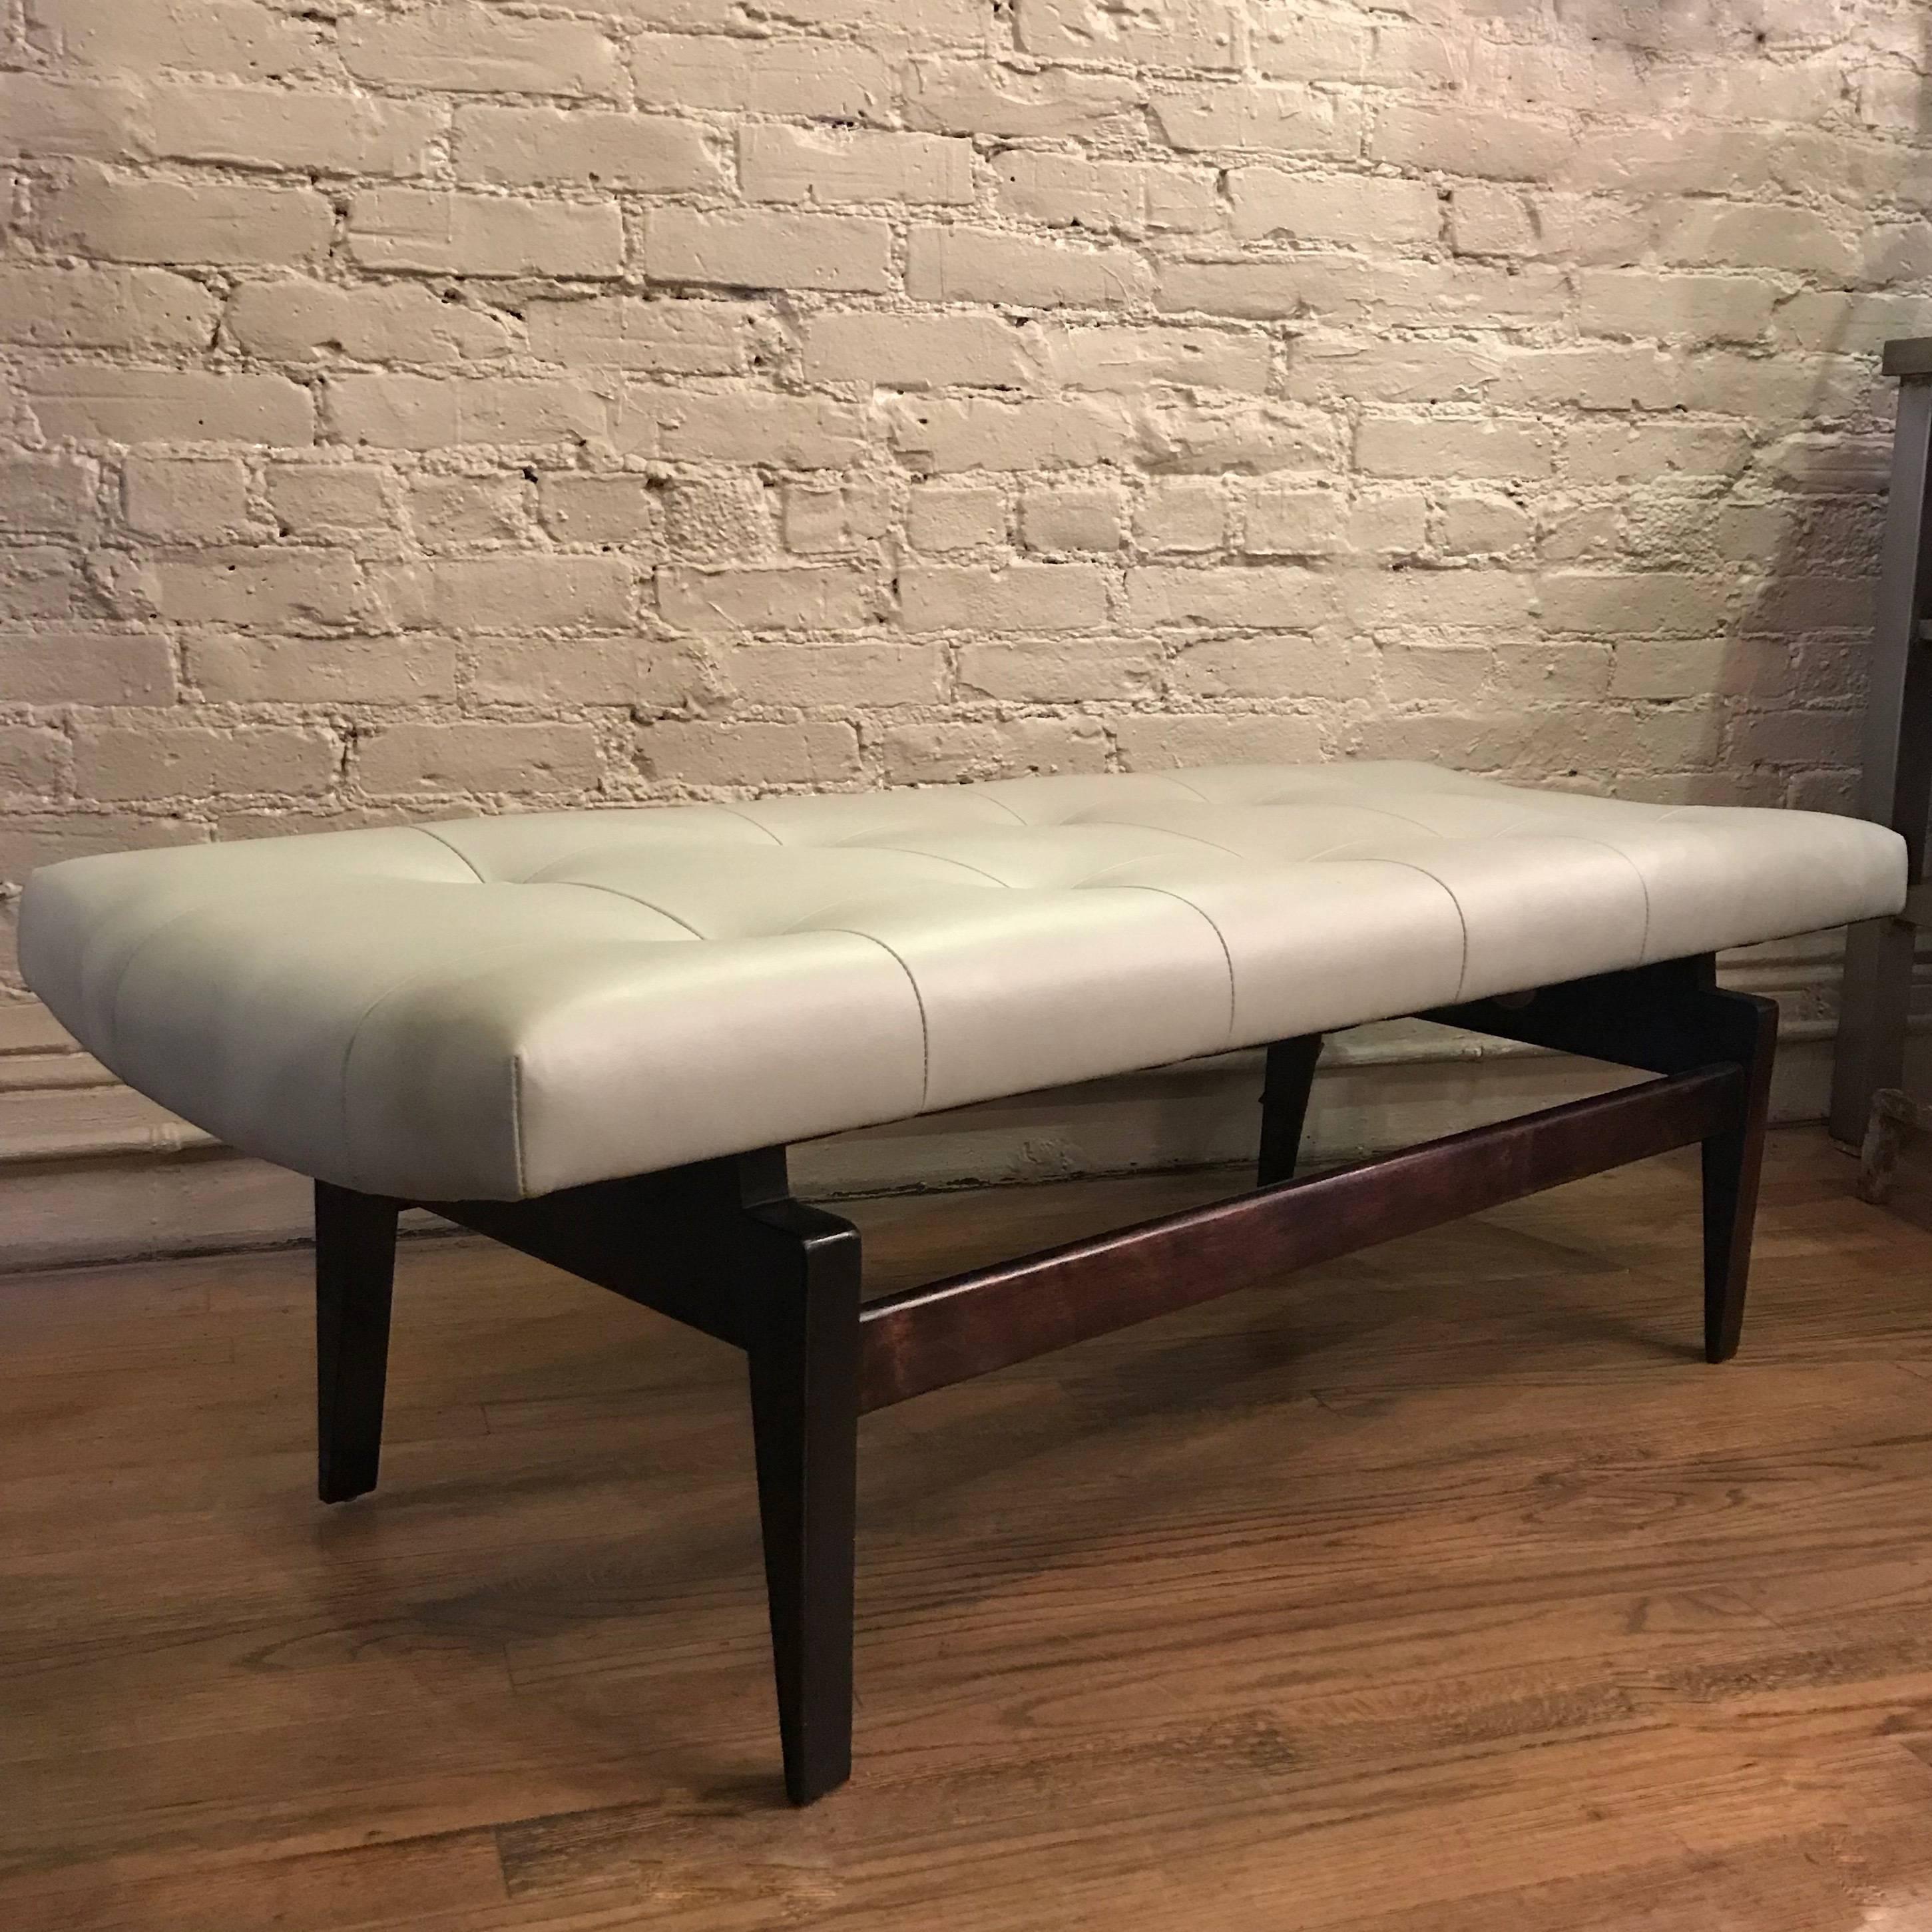 Mid-Century Modern bench by Jens Risom features a newly upholstered, tufted, powder blue leather seat with an ebonized, floating walnut frame.